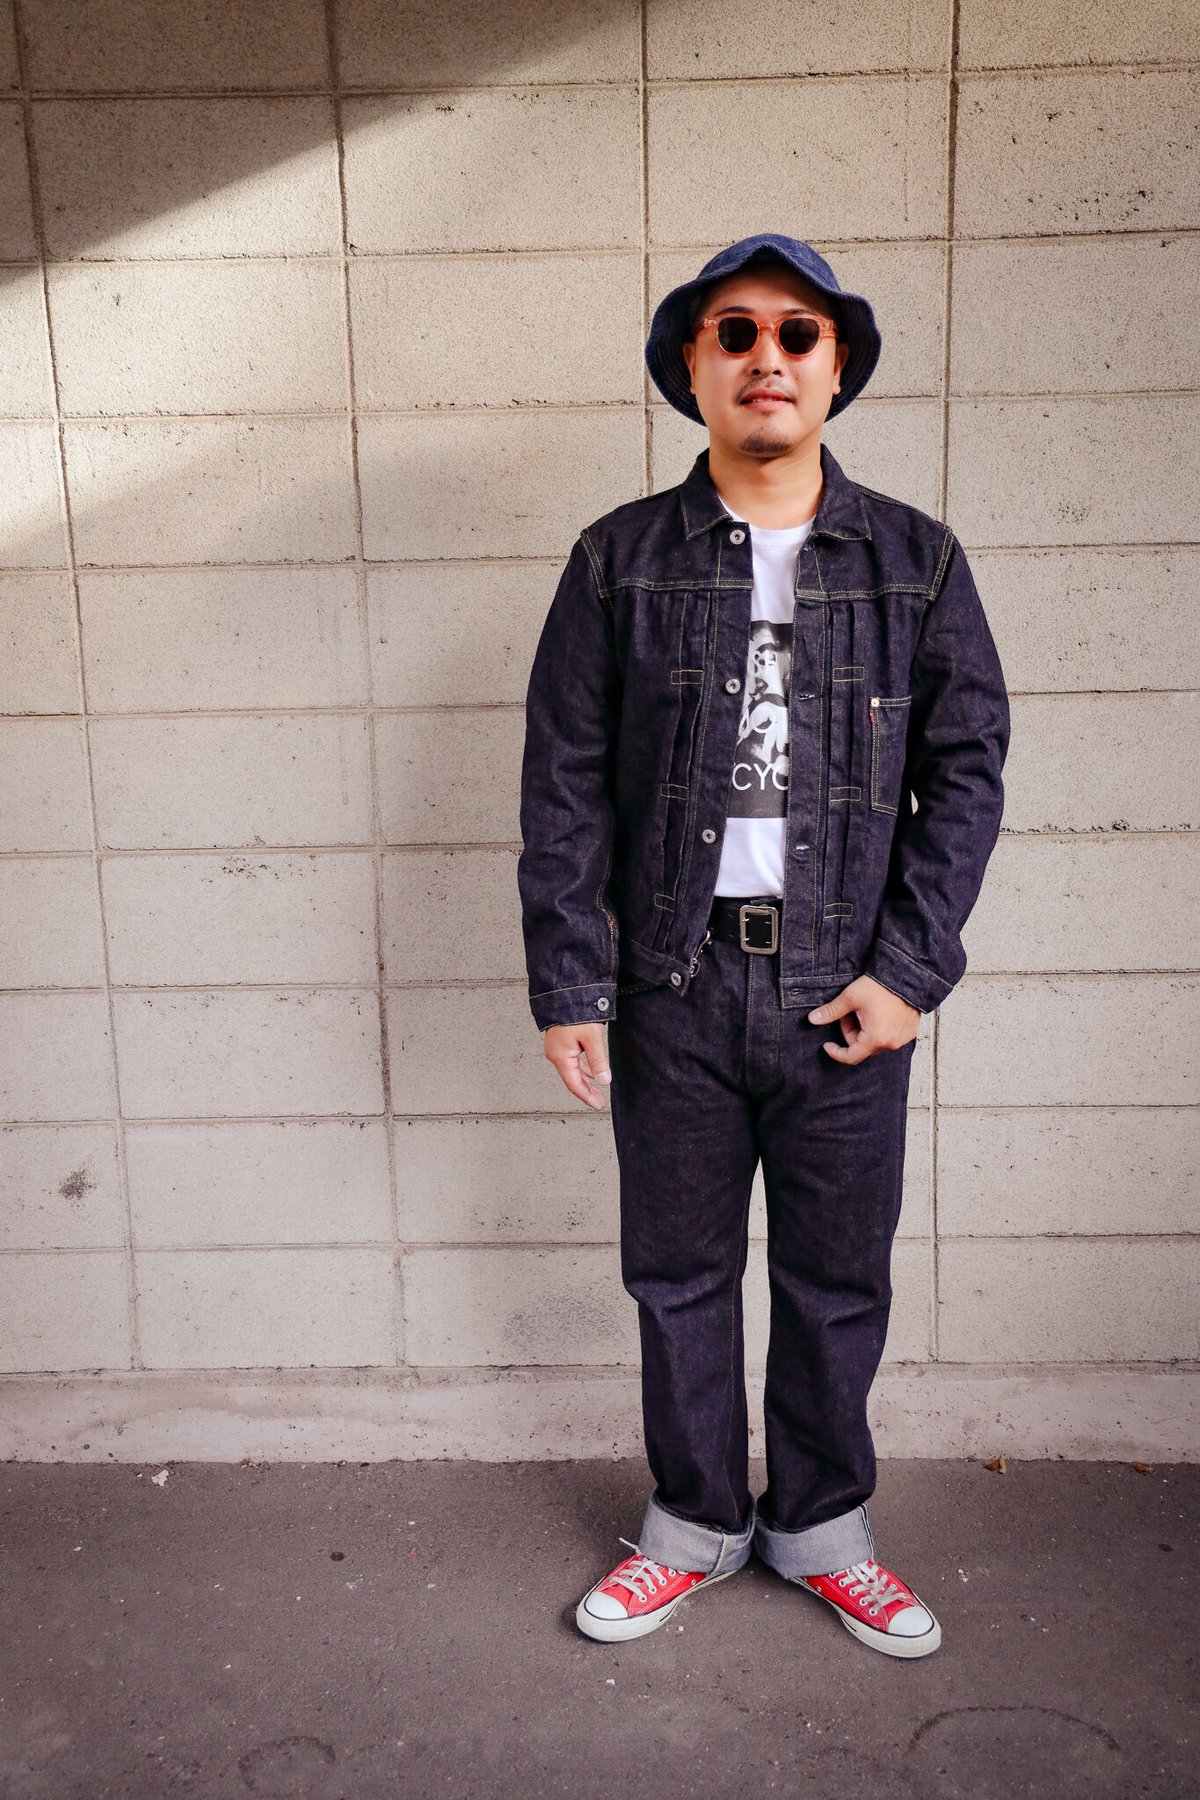 tcb s40's jacket \u0026 jeansTバック仕様でしょうか